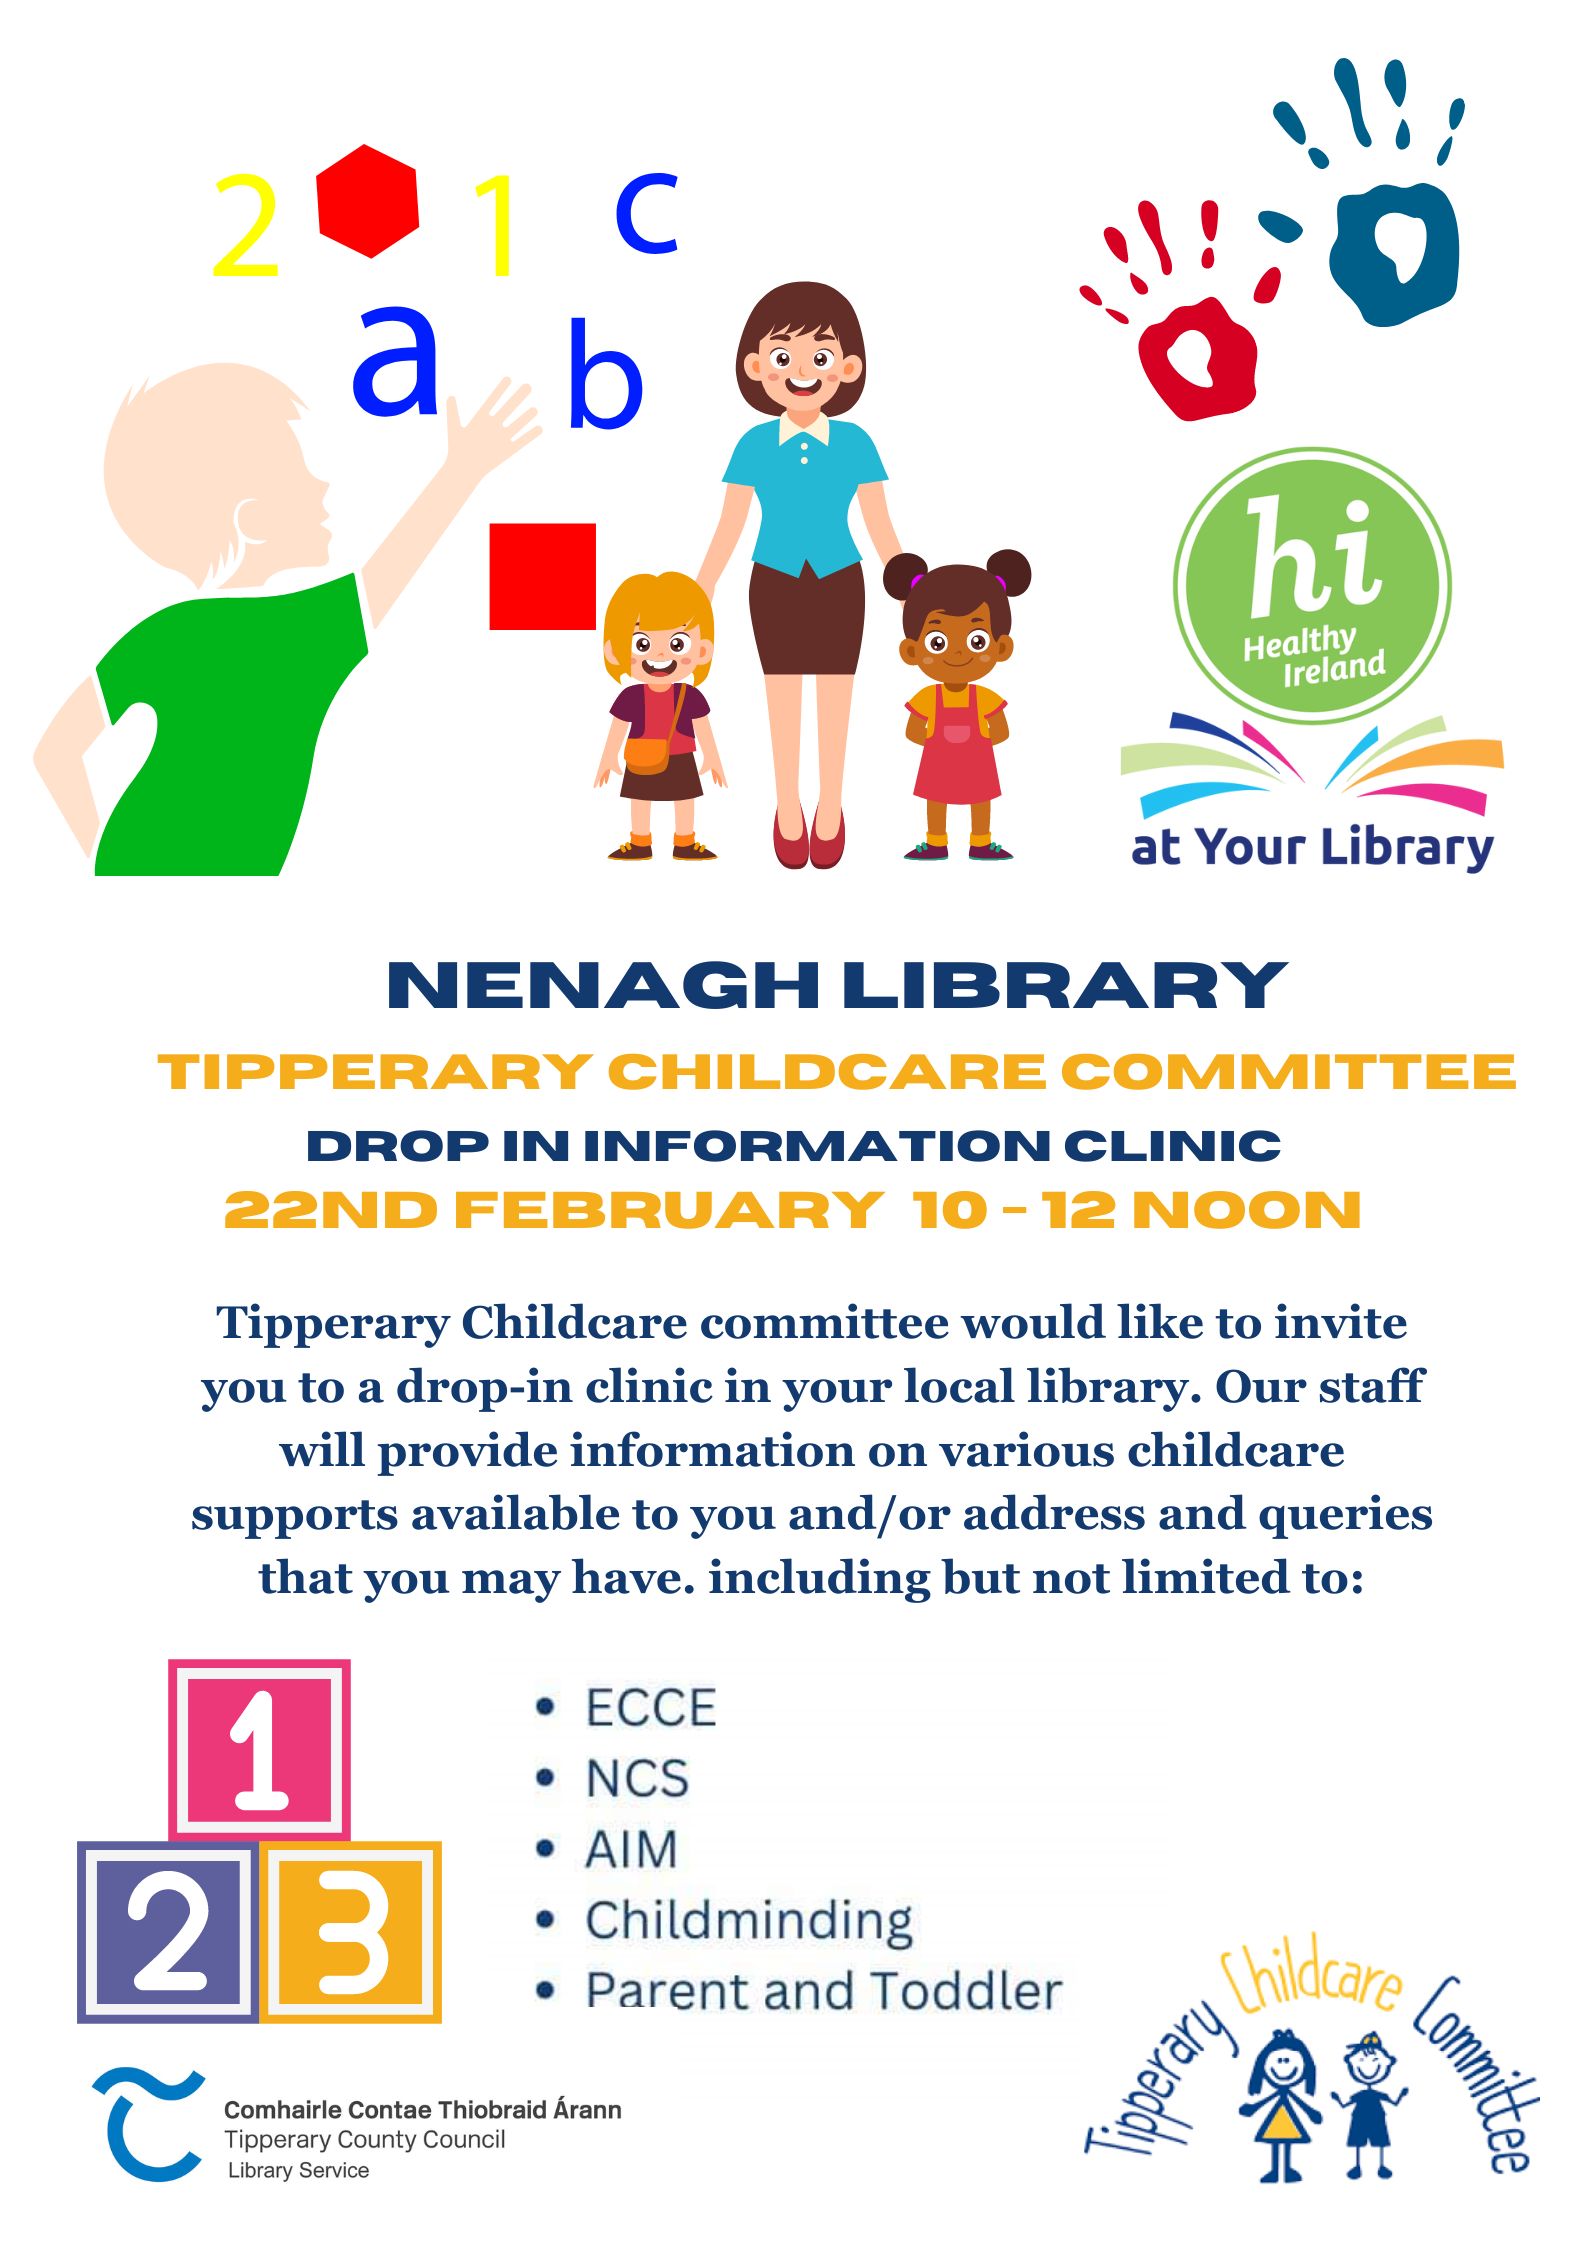 Poster of Tipperary Childcare Committee inviting you to a drop-in clinic in Nenagh Library.